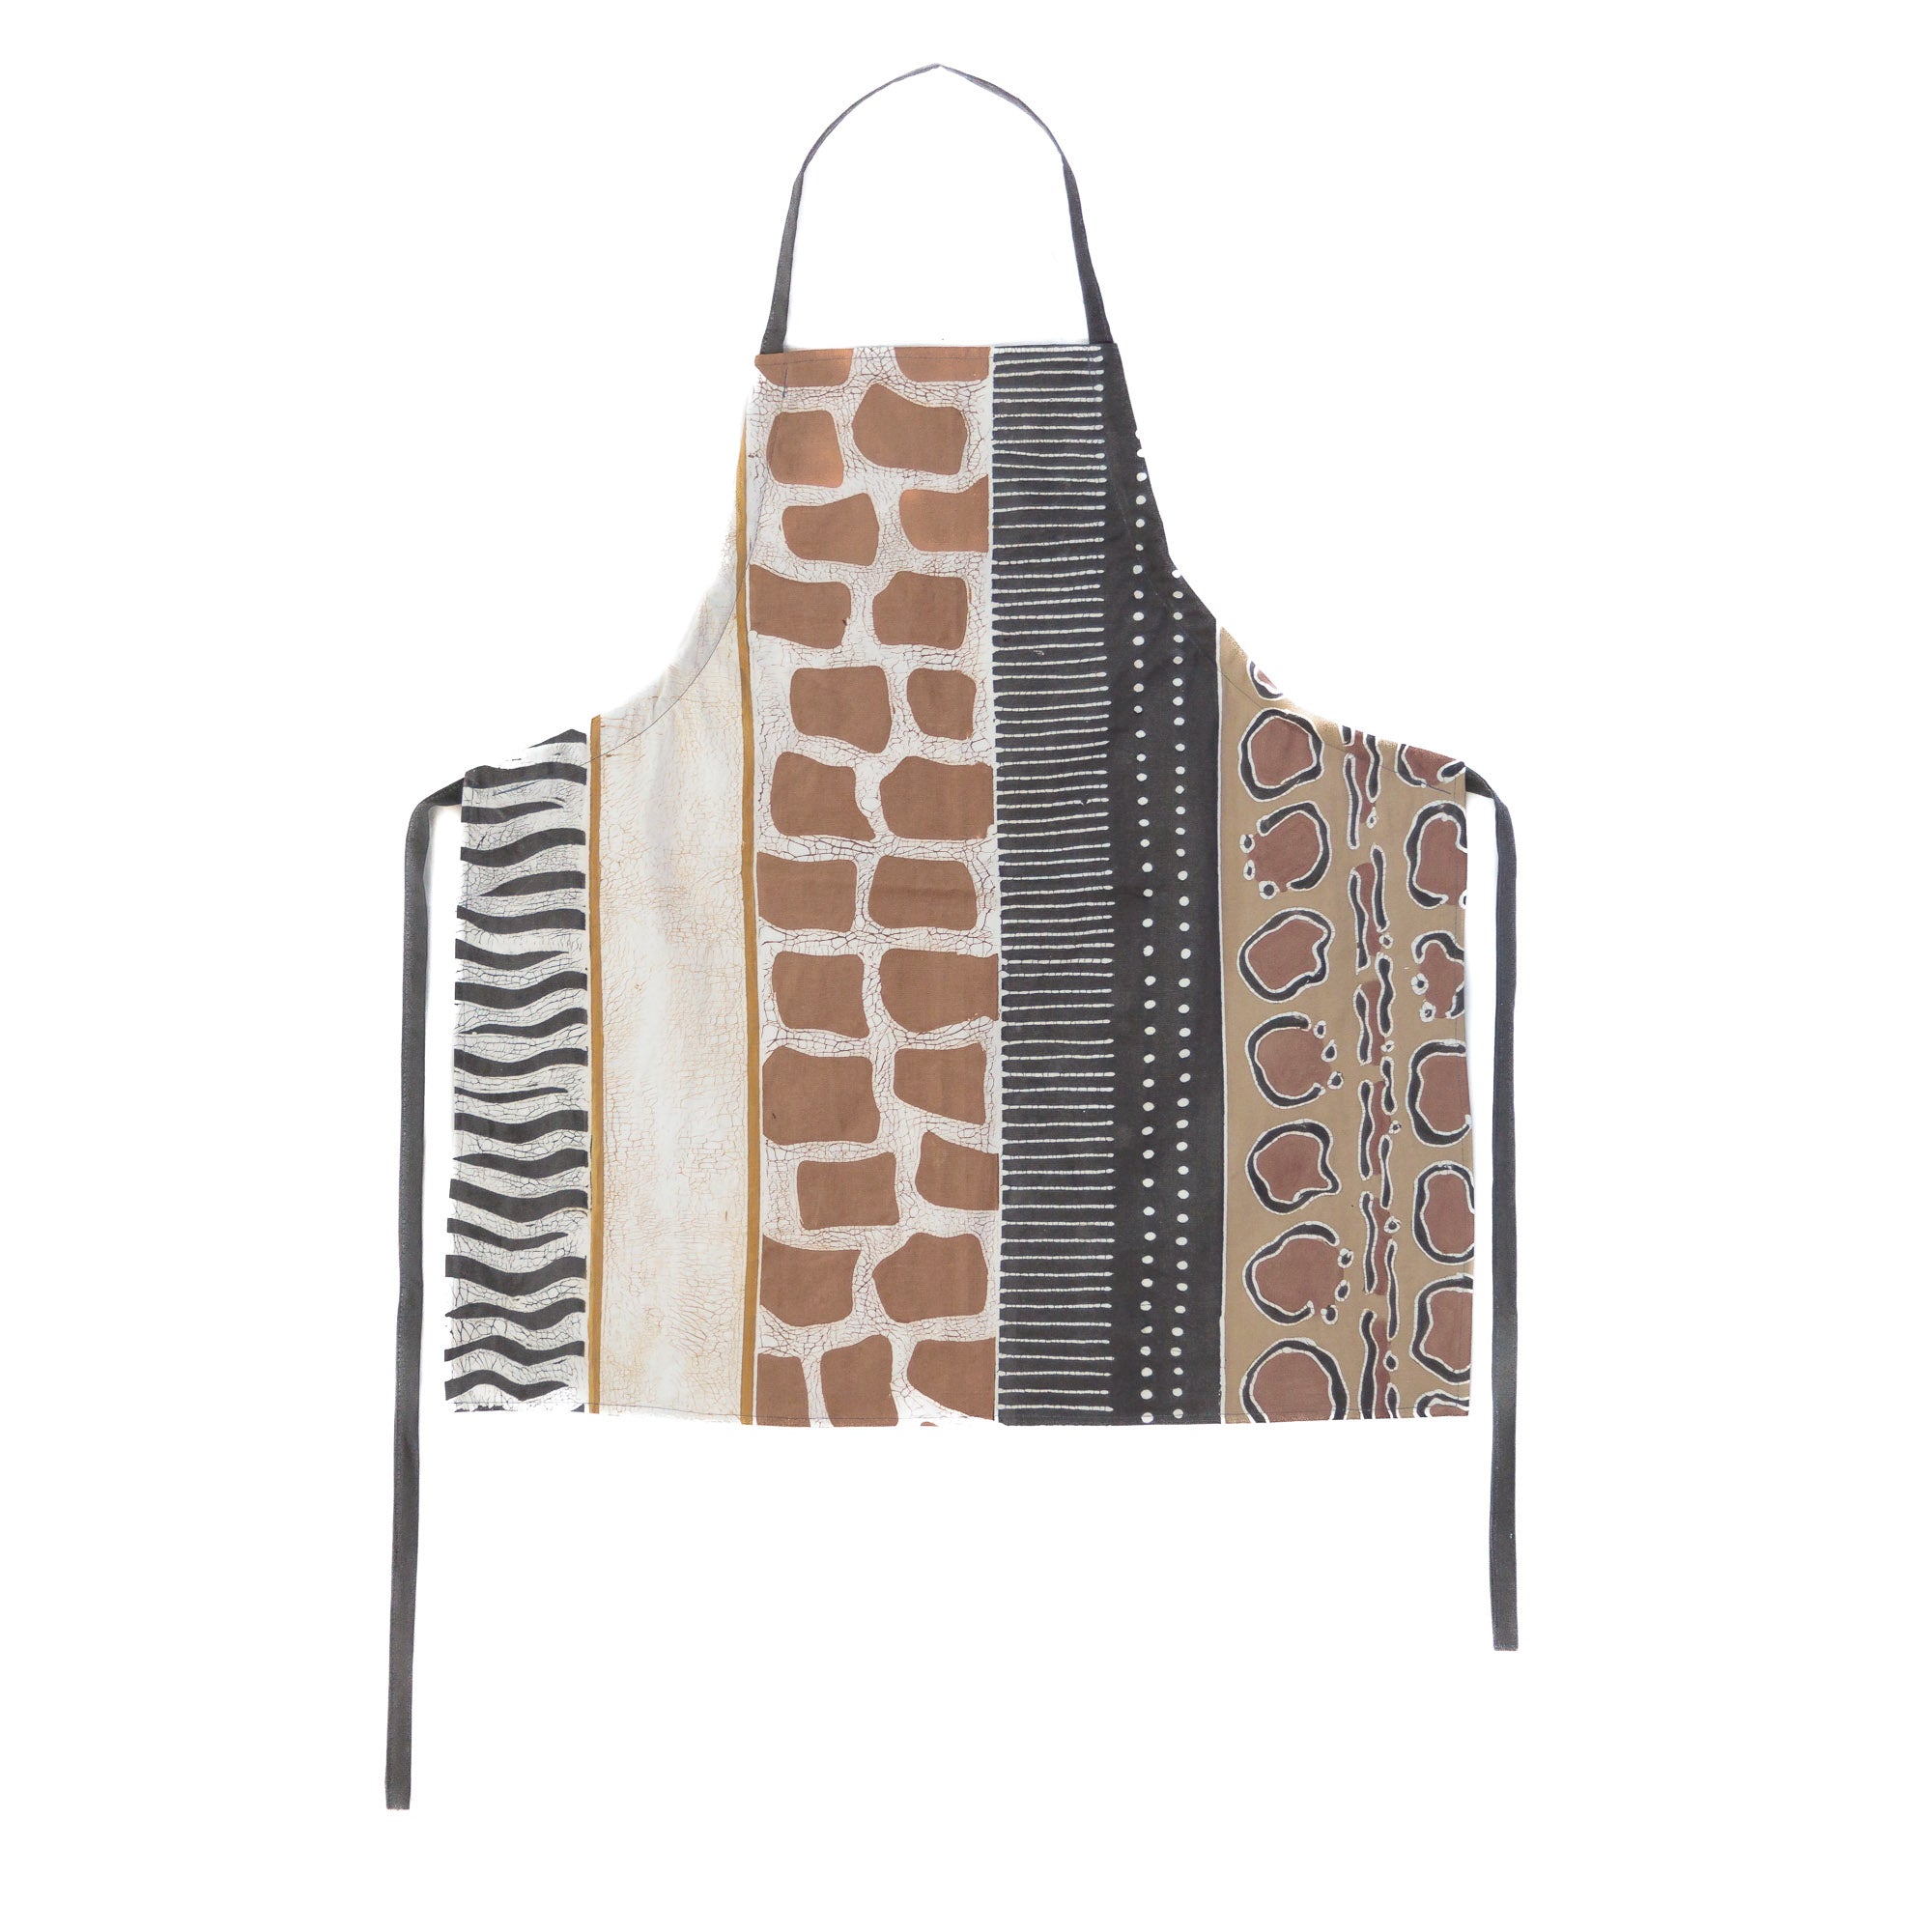 Mkupo Multiprint Animal Apron - Handmade by TRIBAL TEXTILES - Handcrafted Home Decor Interiors - African Made